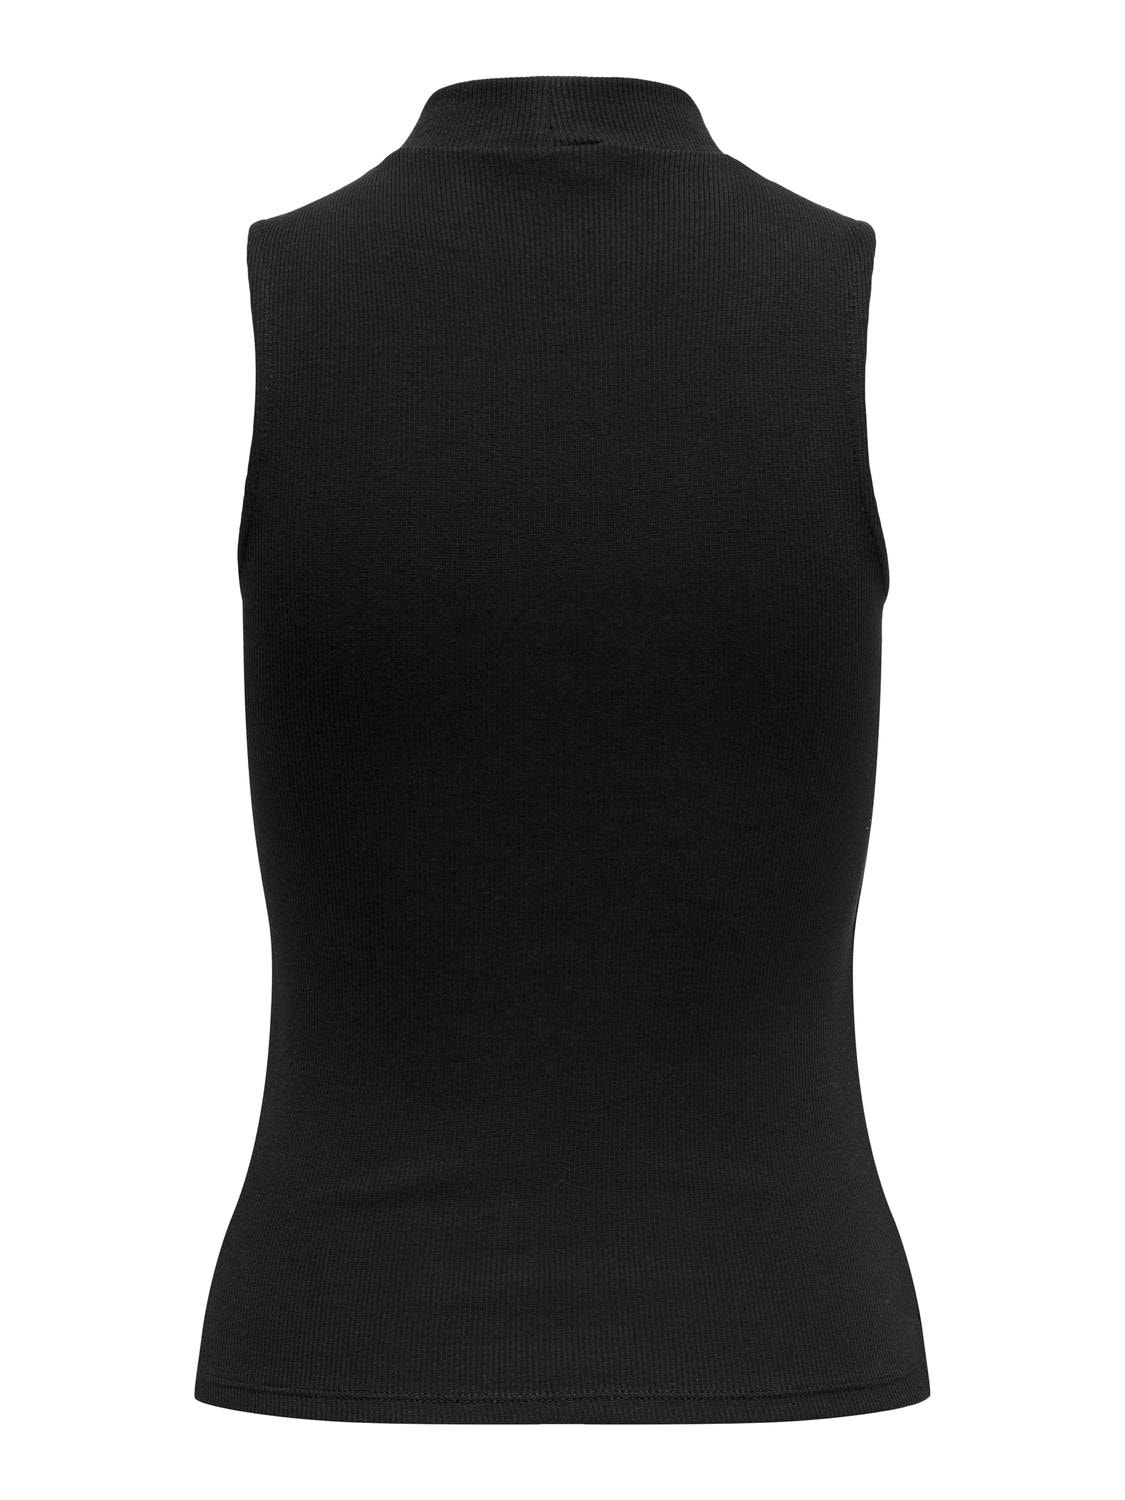 ONLY Tops Slim Fit Col haut -Black - 15227000